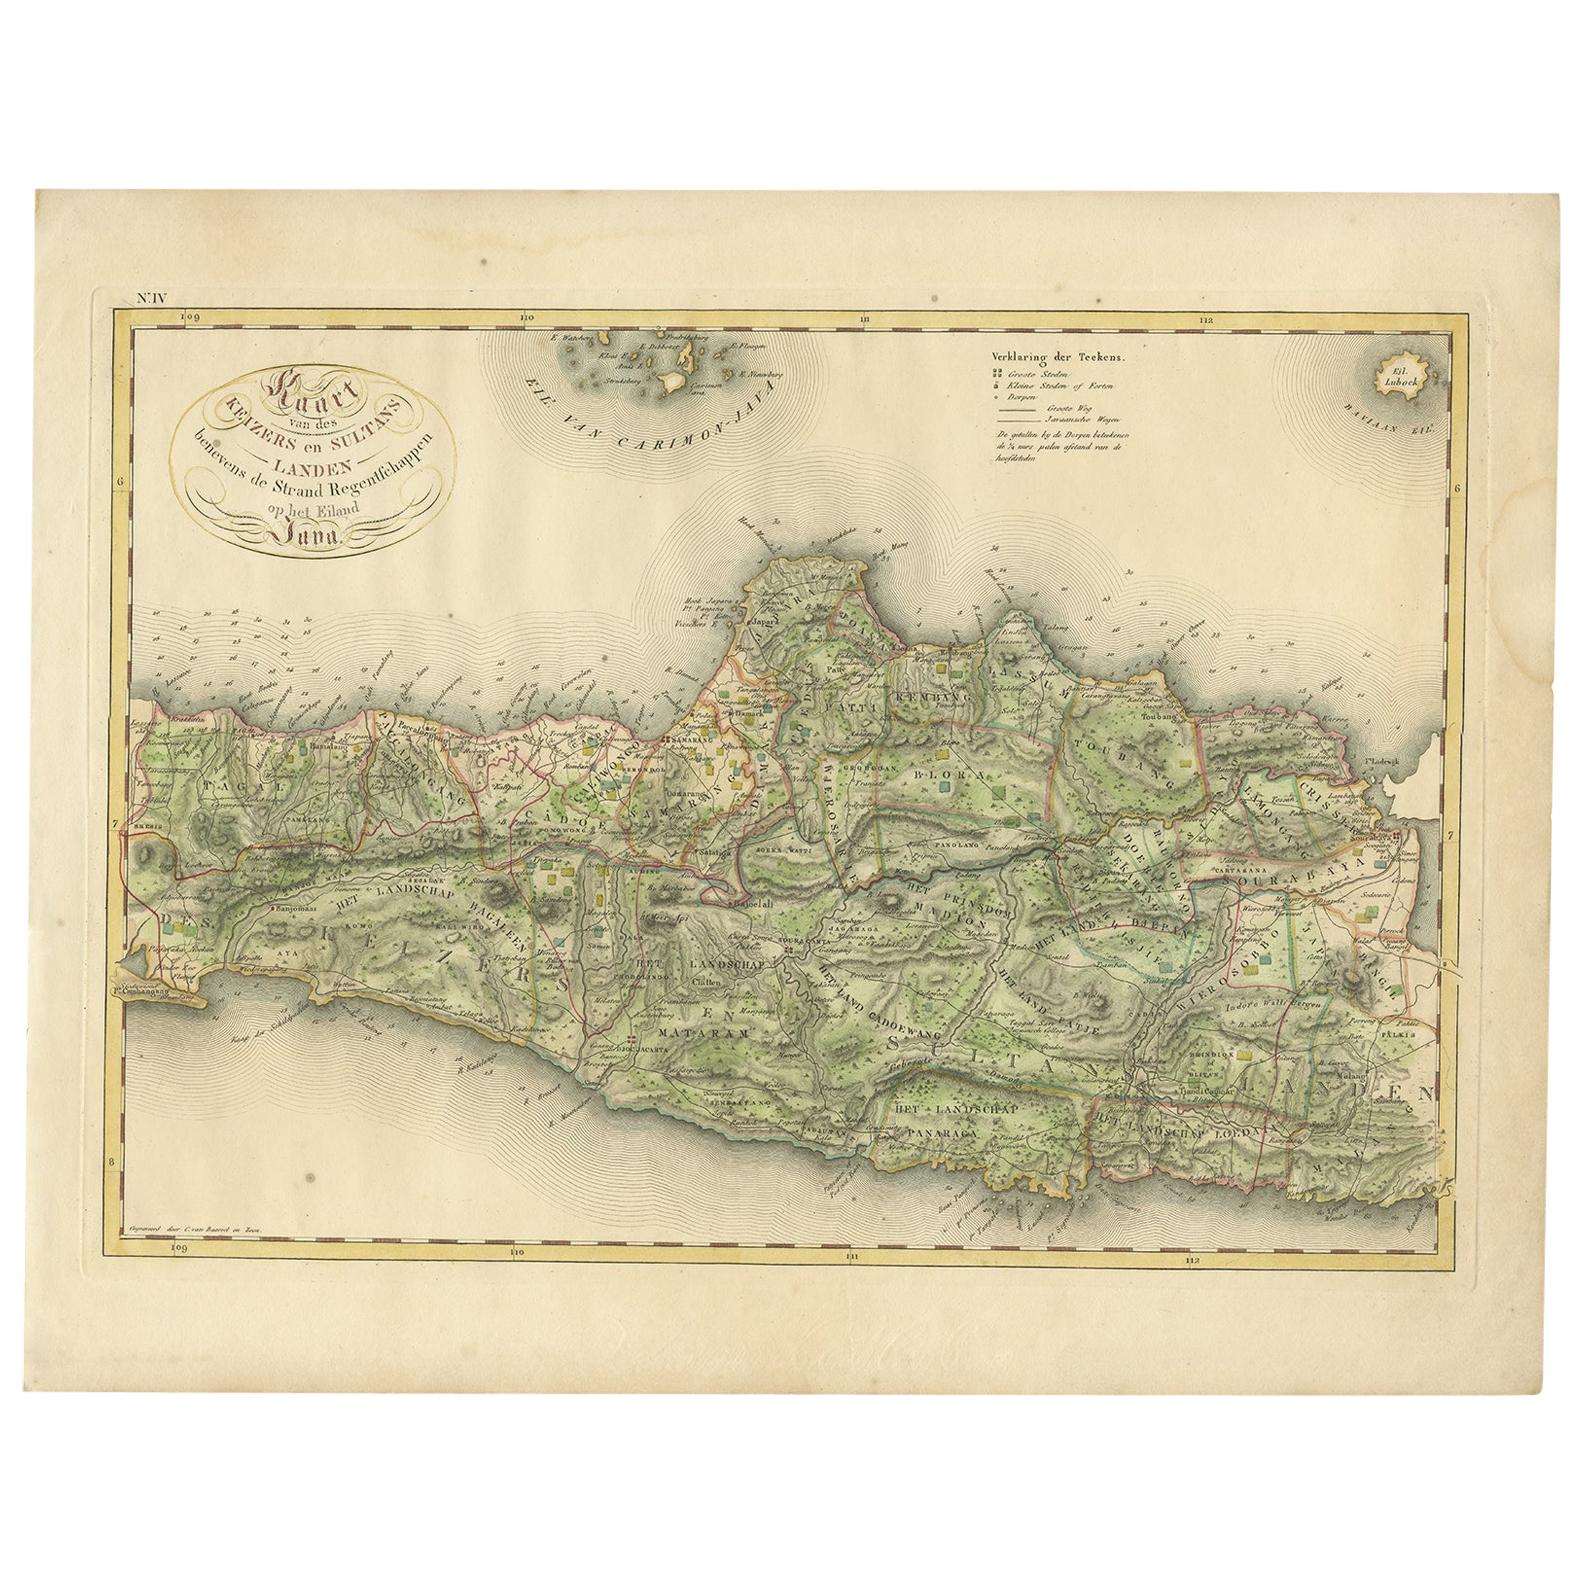 Antique Map of Central and East Java by Van den Bosch, 1818